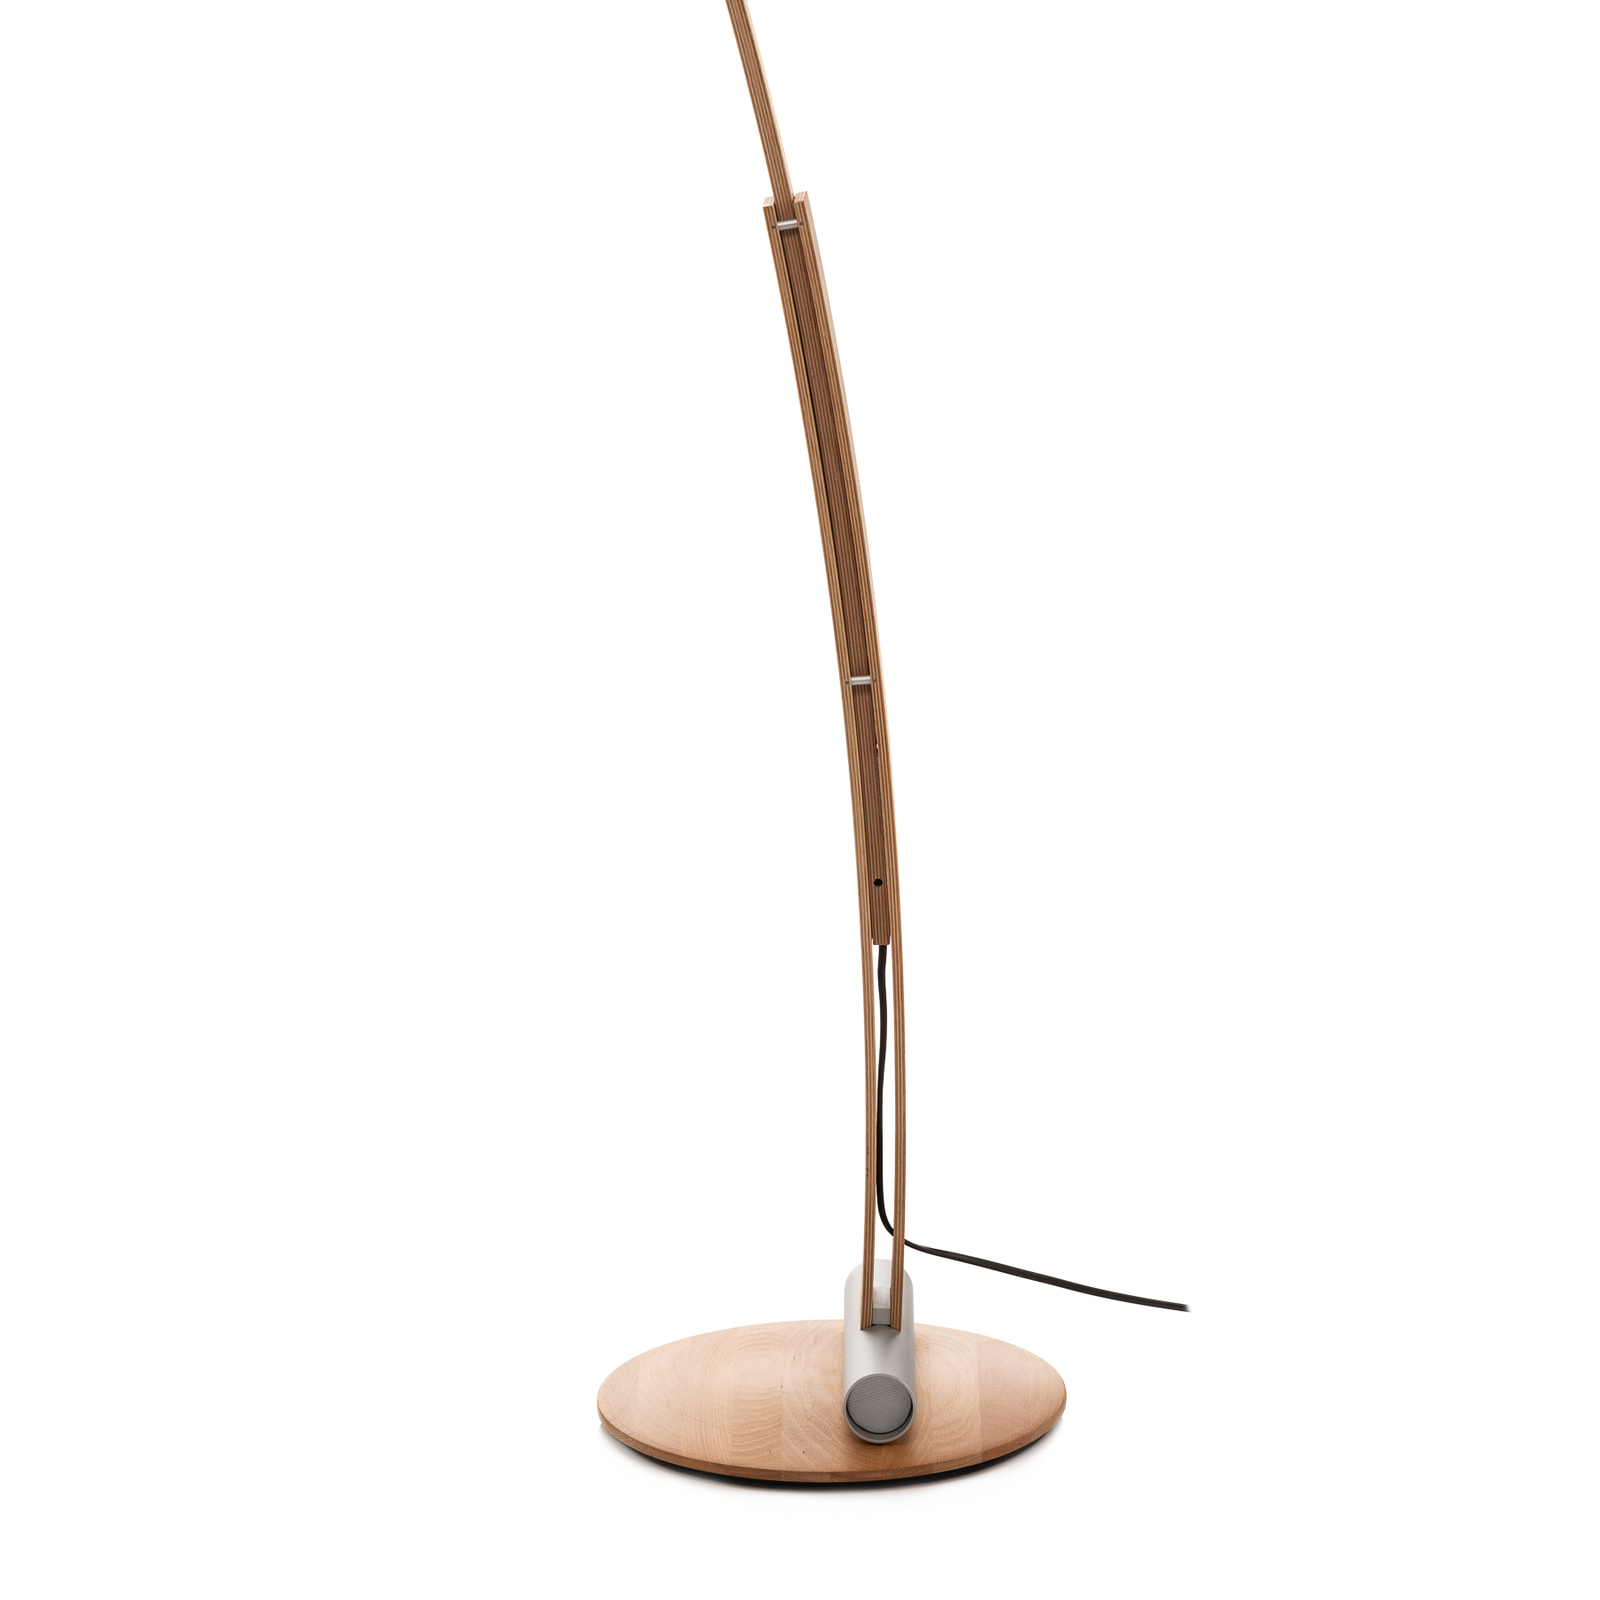 Bolino floor lamp with a dimmer